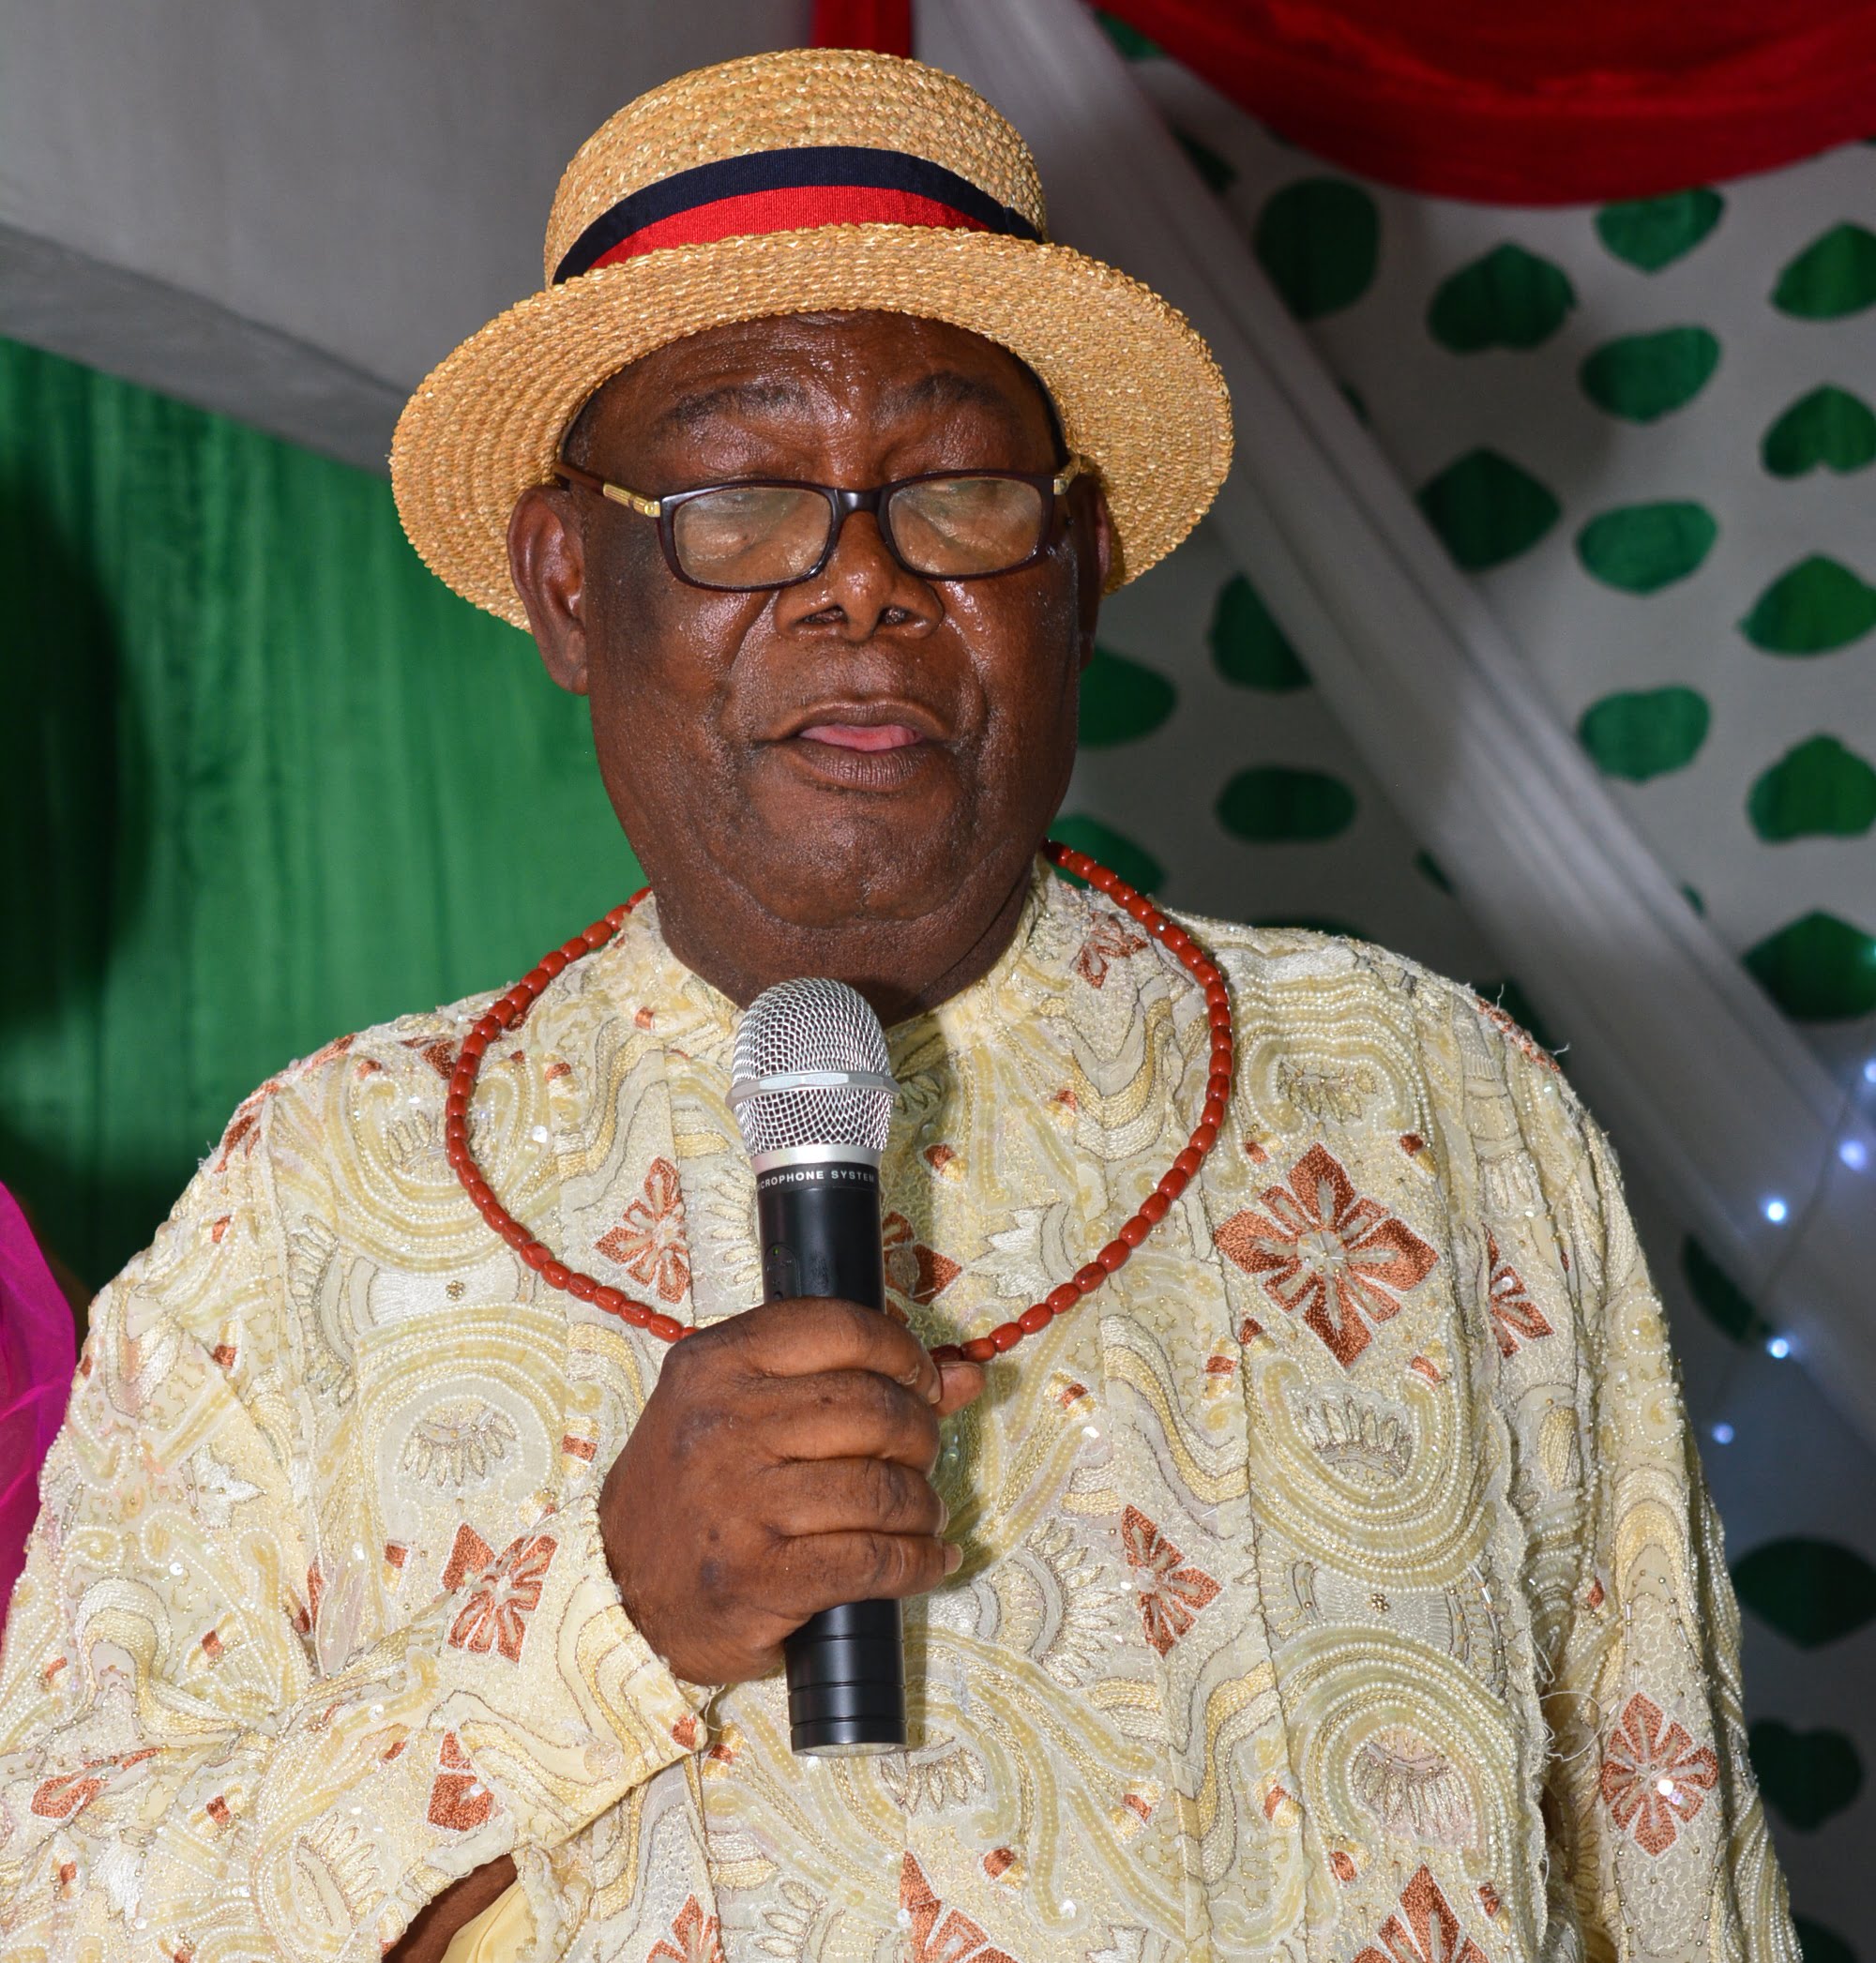 The Urhobo Progress Union, UPU, President General, Chief Joe Orode Omene on Sunday called on the Urhobo nation to disregard a UPU election purported held on Saturday with one Barr Ese Gam Owe emerging as the President General, saying it is a charade, just as he insisted that the case is in court and judgement will soon be passed.